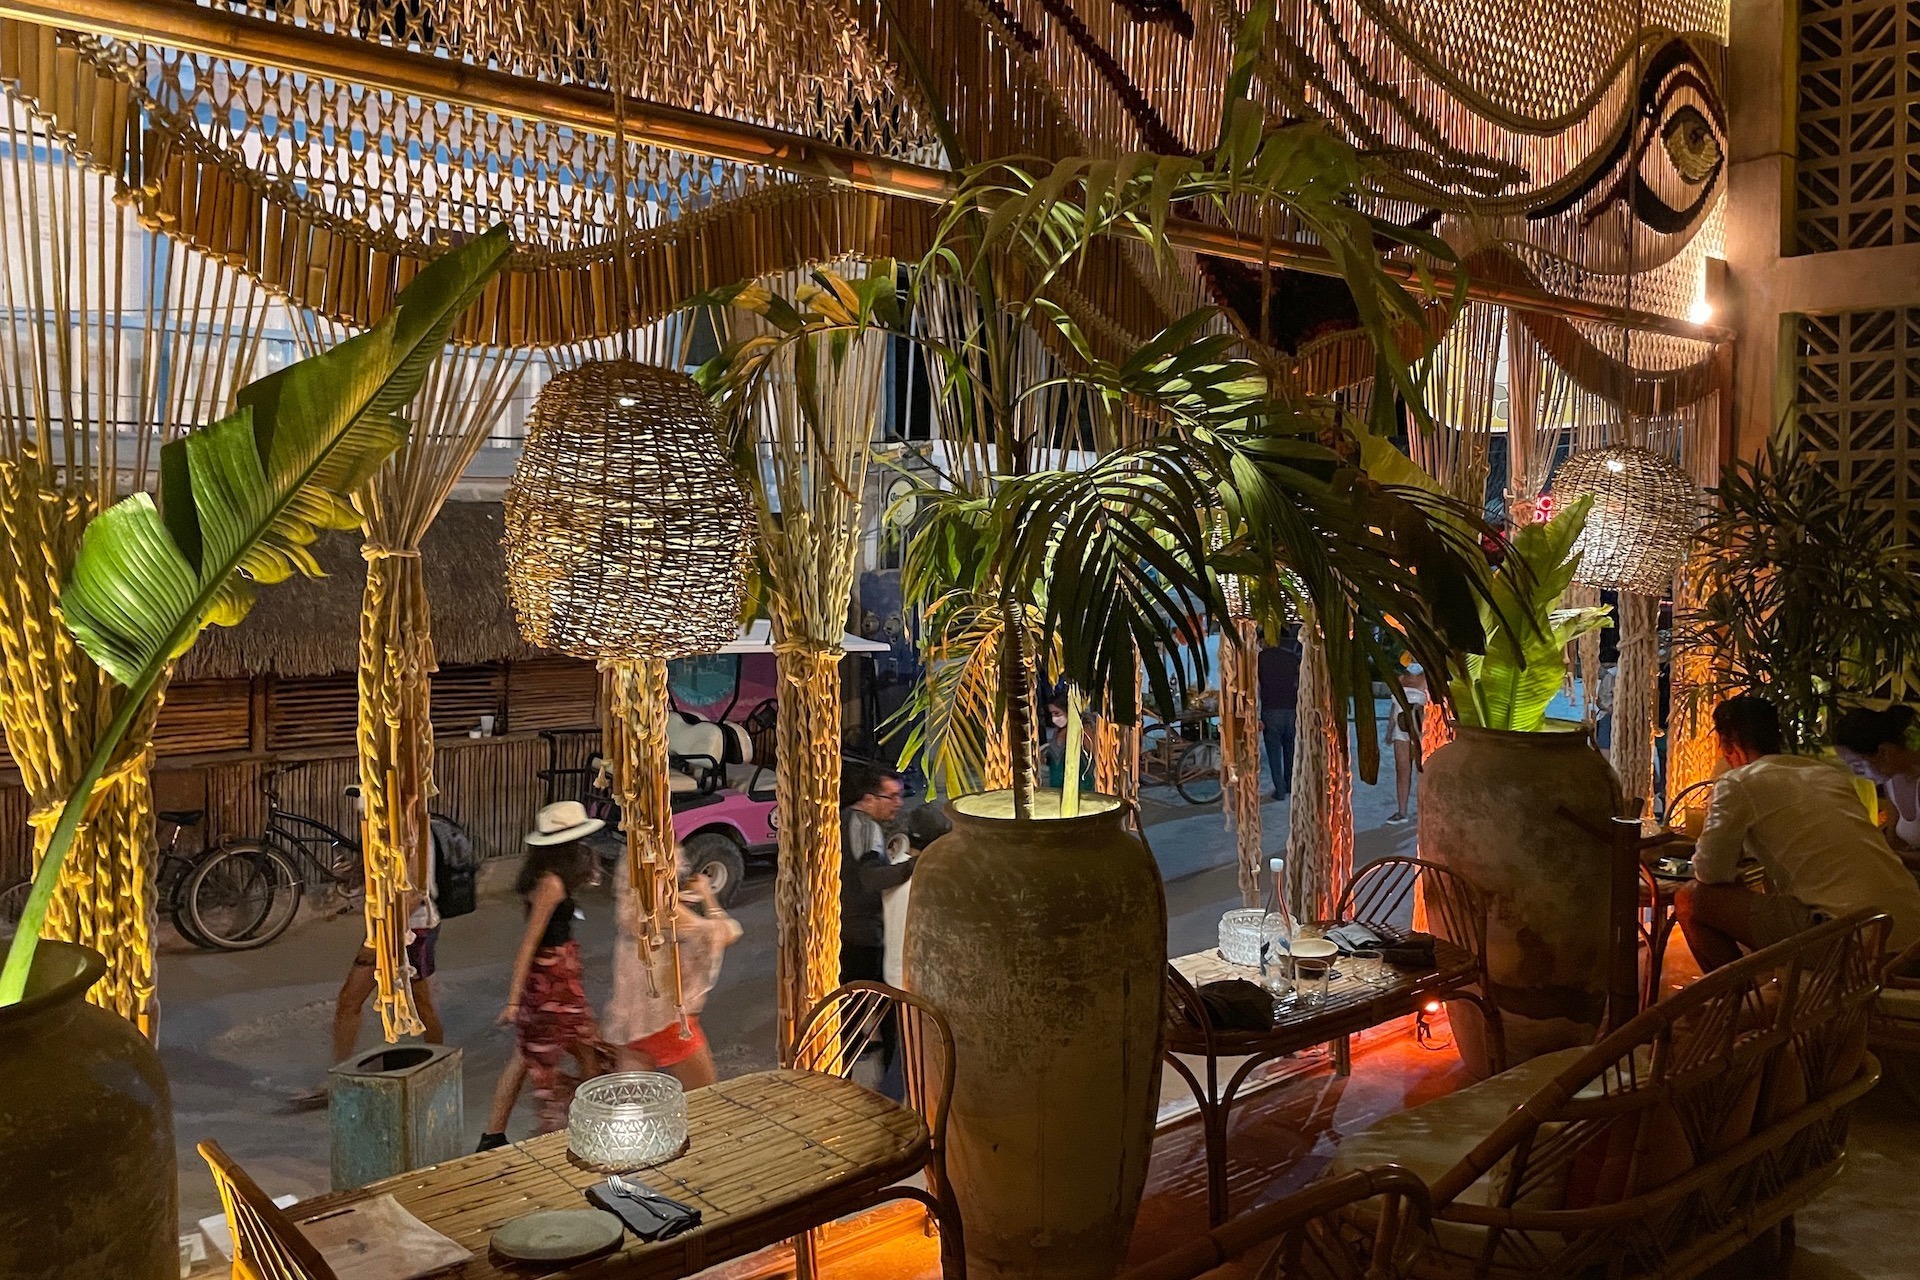 Taste The Best Of Holbox At The Top Restaurants!